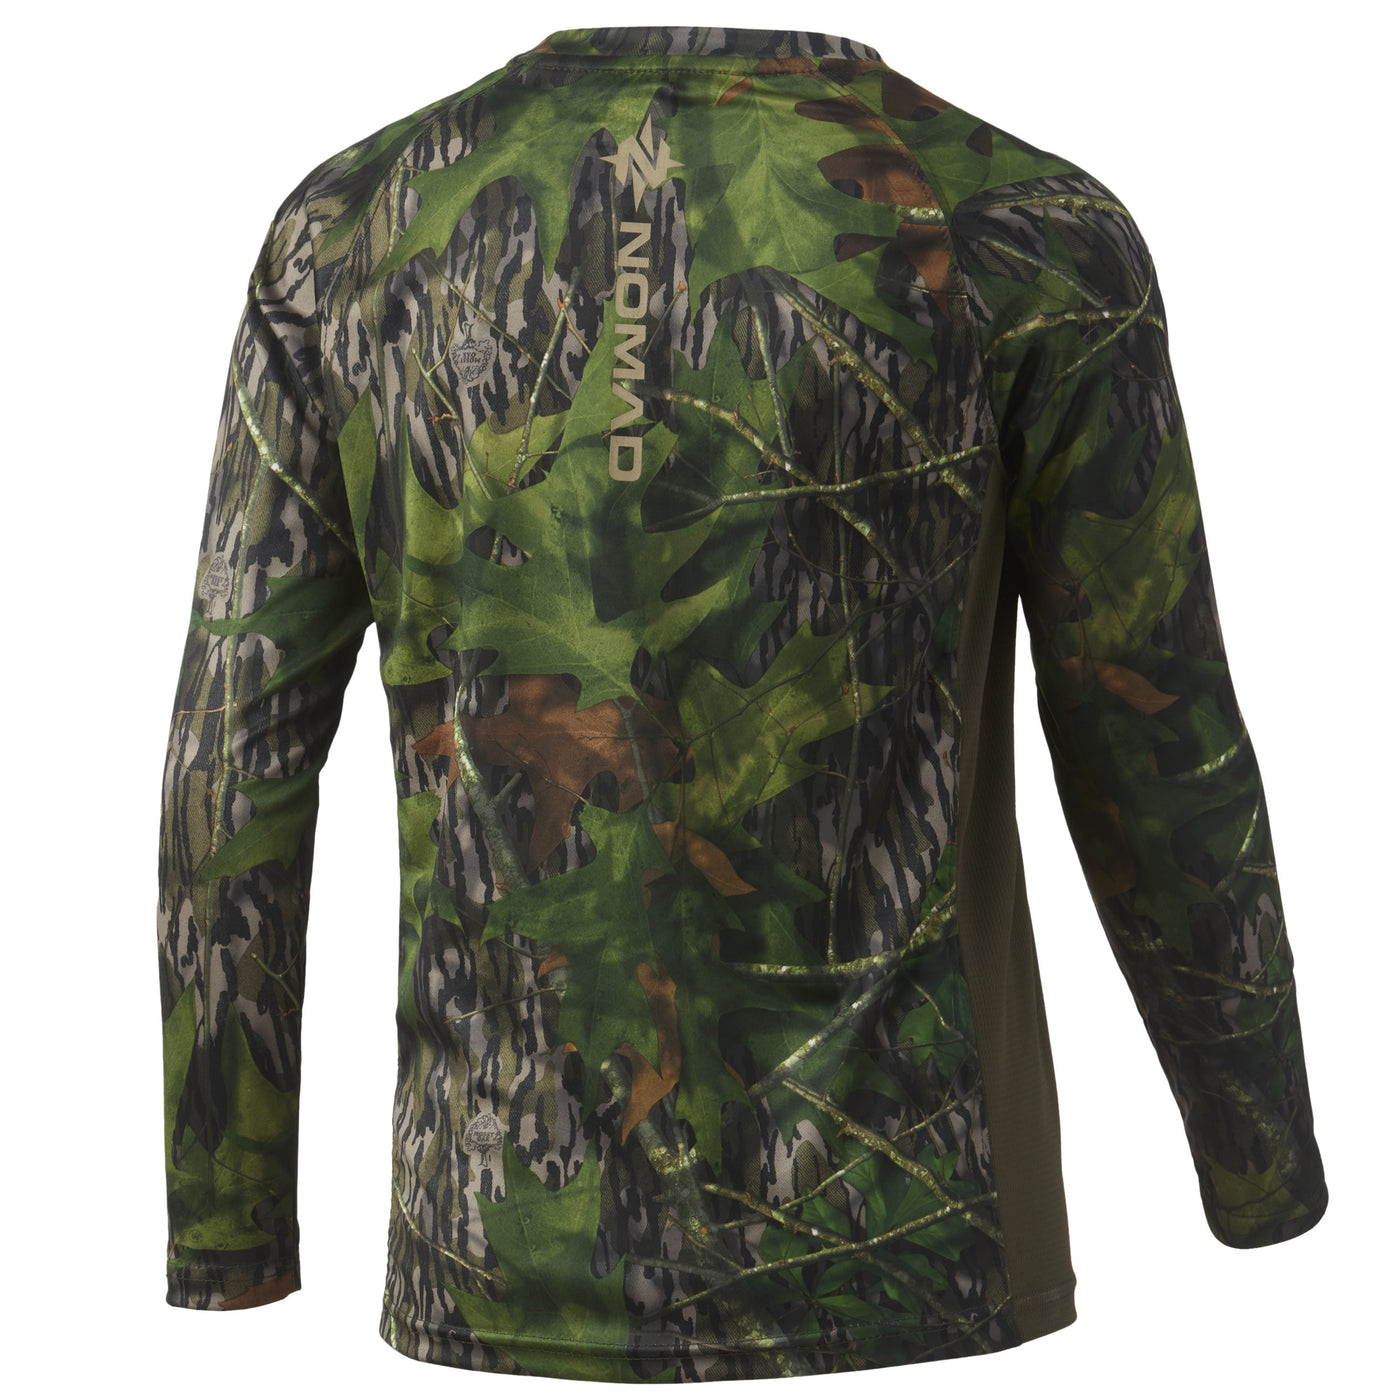 Nomad Youth Pursuit Camo Long Sleeve